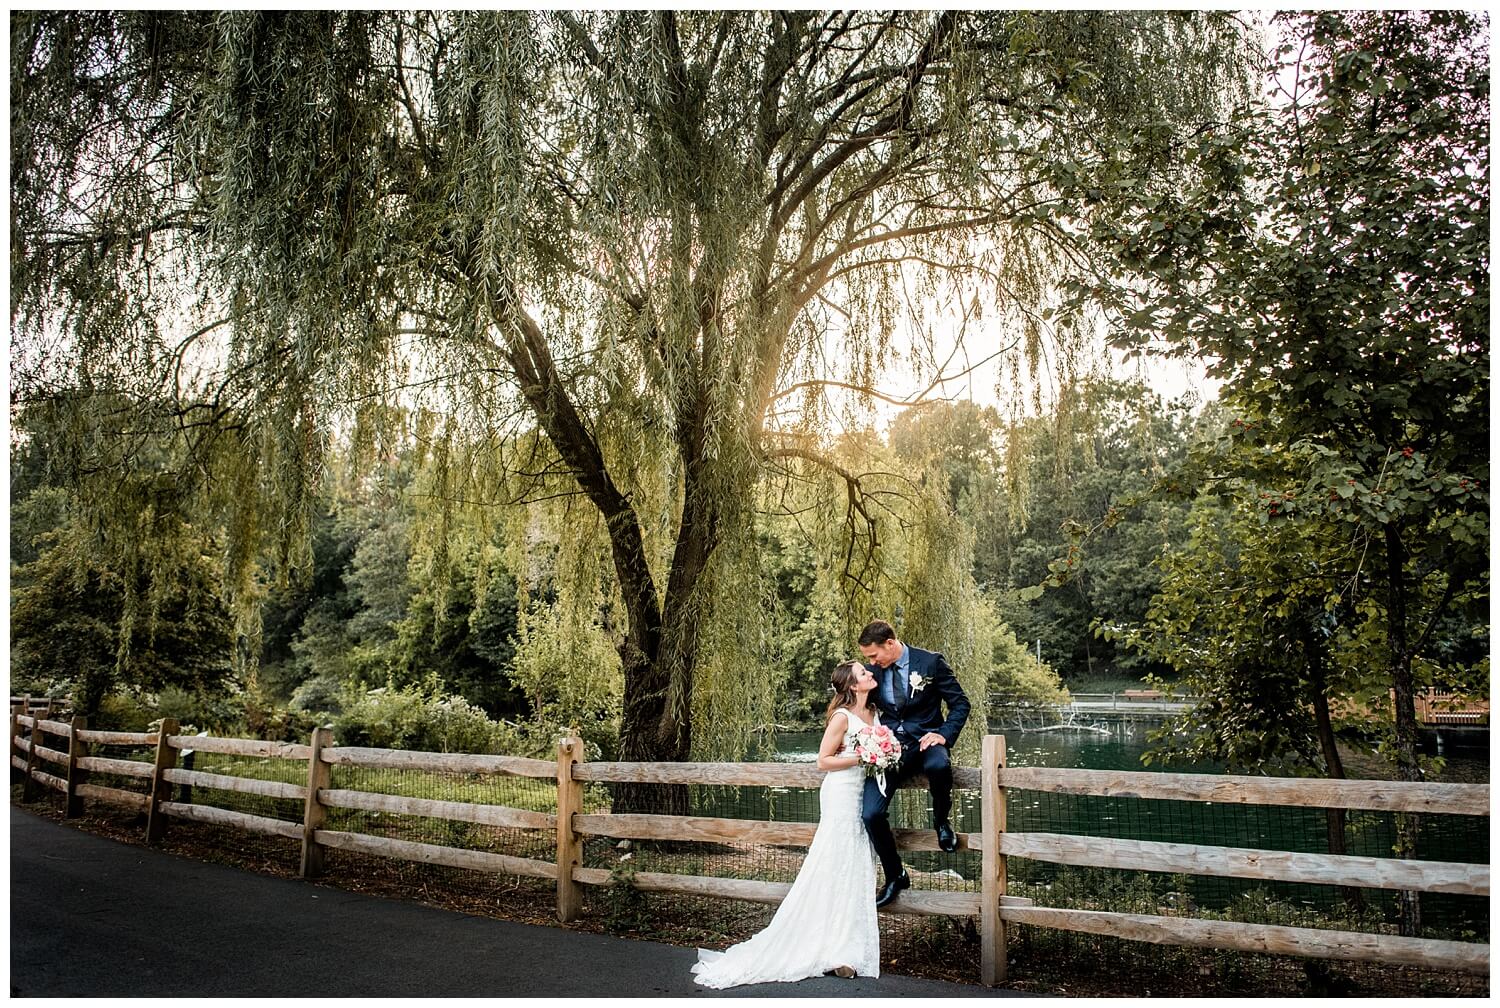 romantic bride and groom portrait in front of weeping willow tree at cleveland zoo wedding in ohio